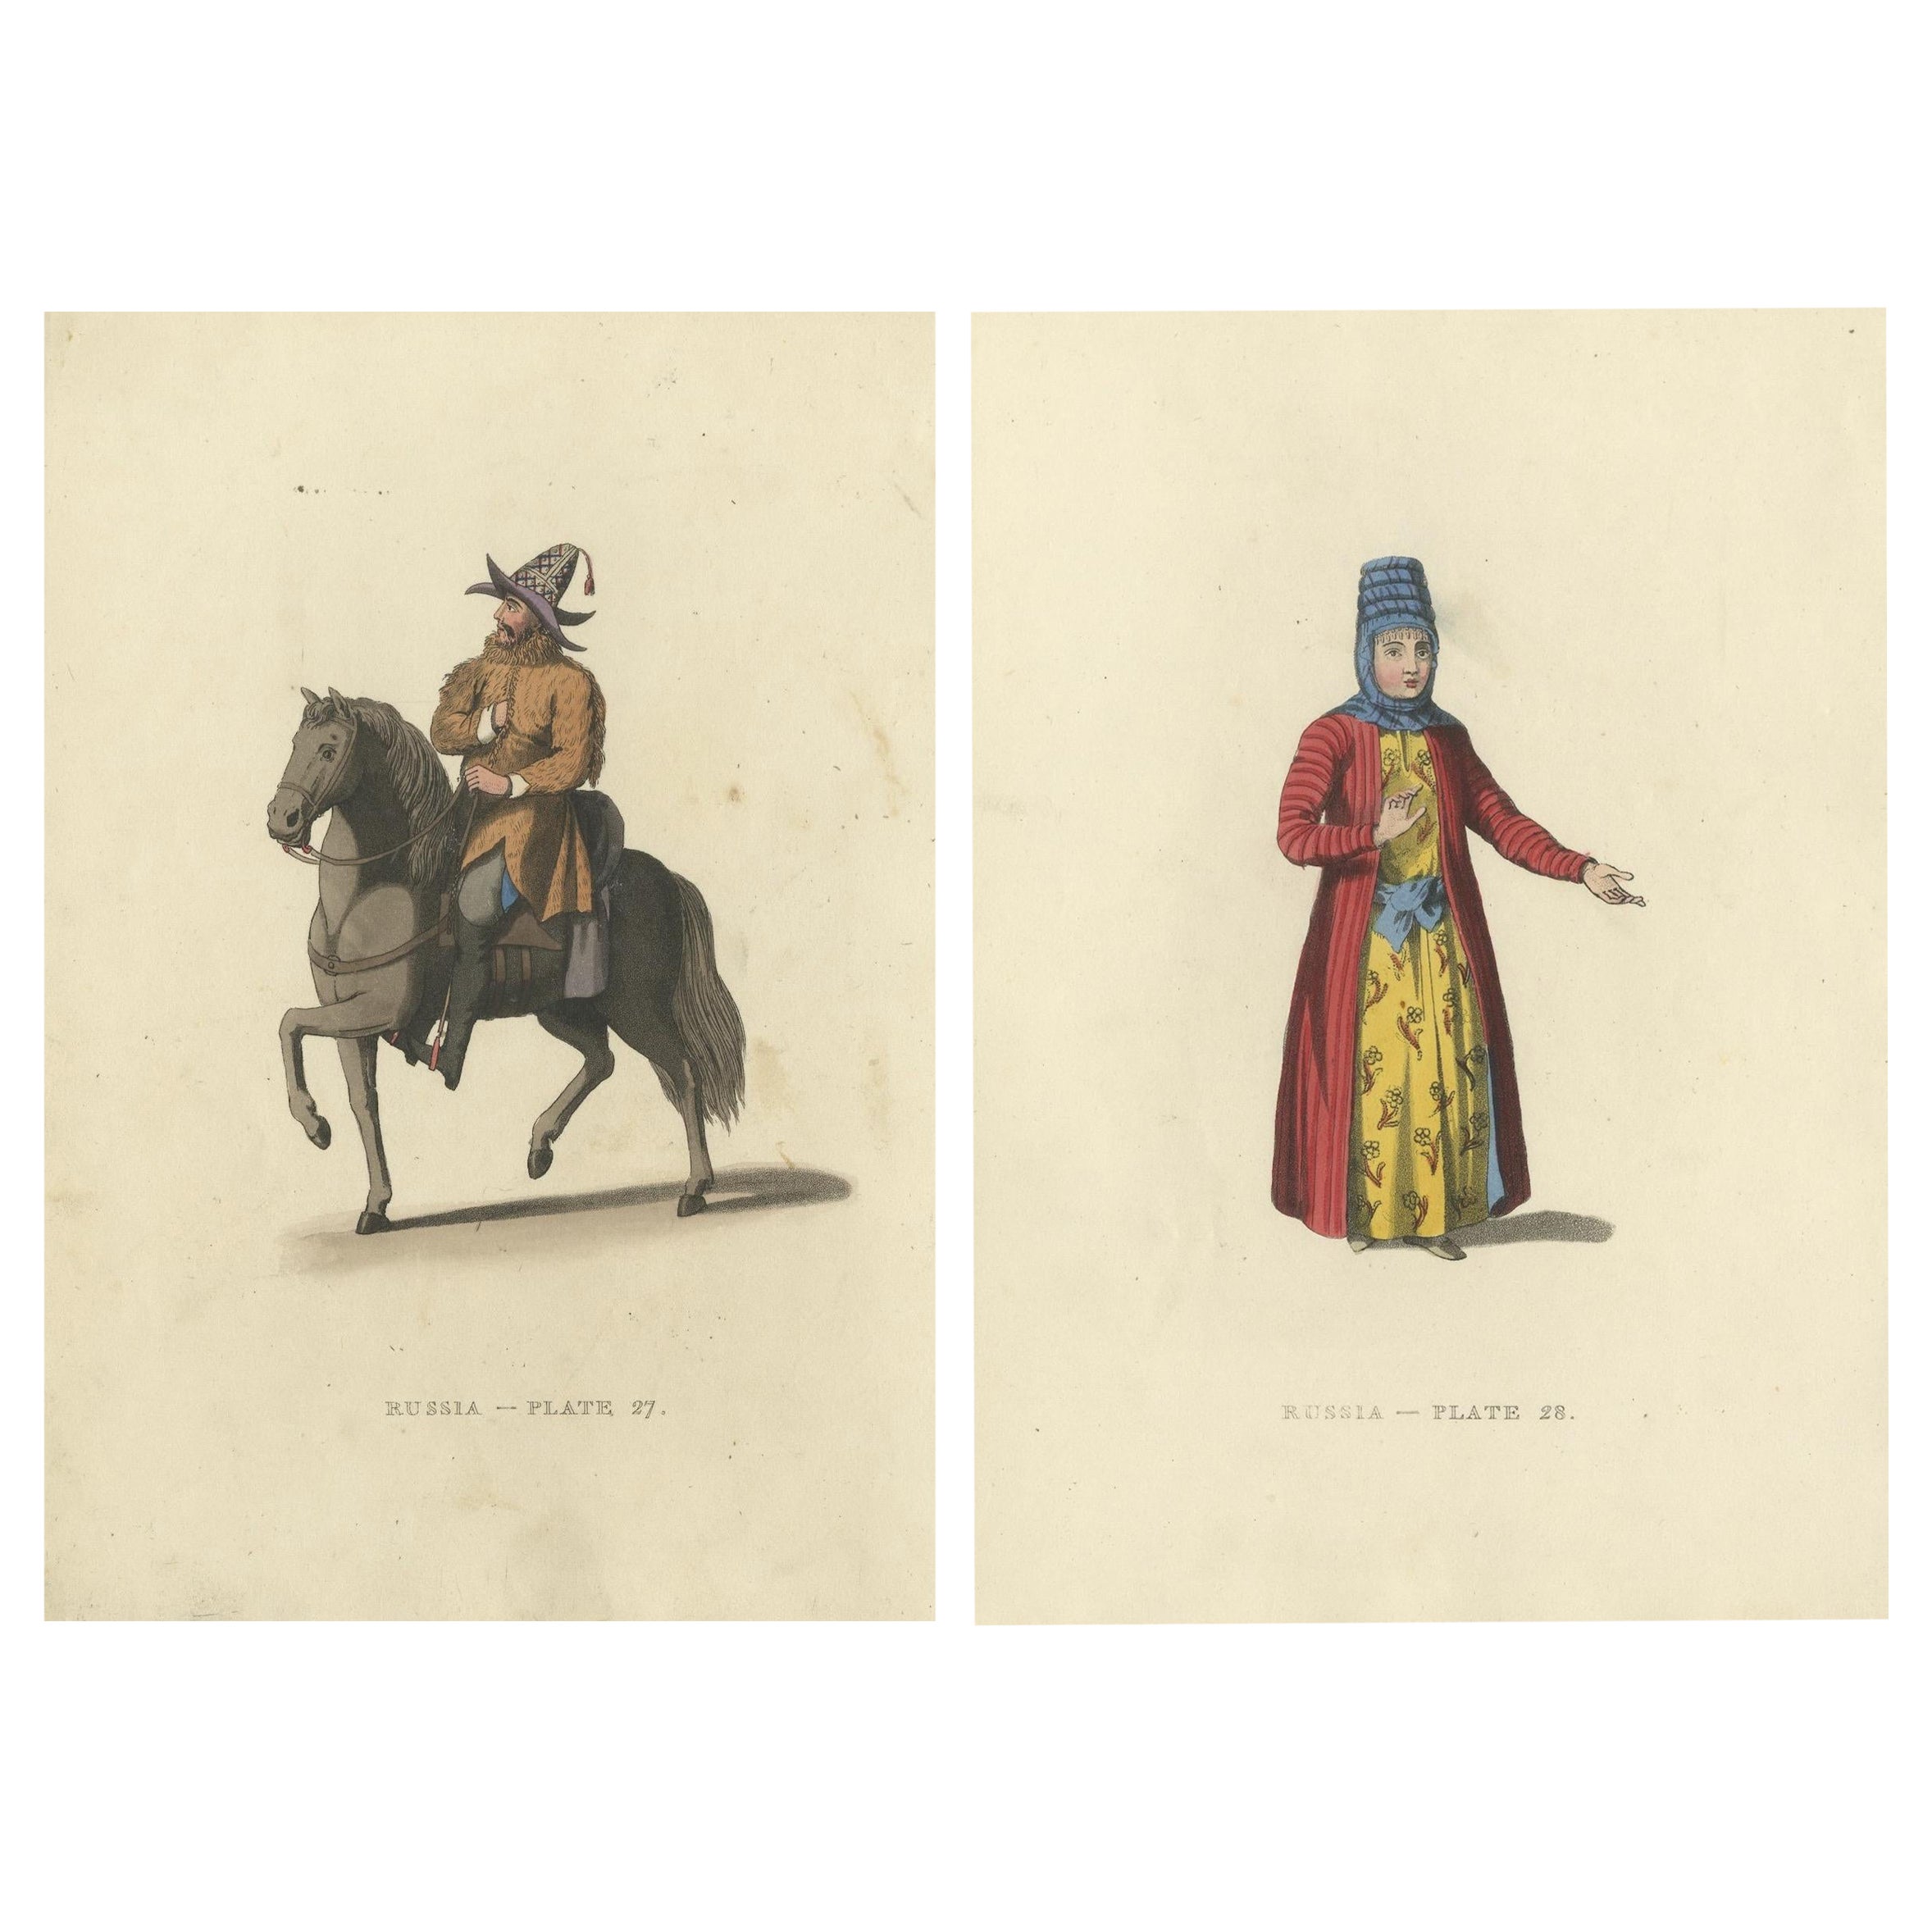 Kirghiz Elegance Engraved: A Study of 19th Century Central Asian Attire, 1814 For Sale